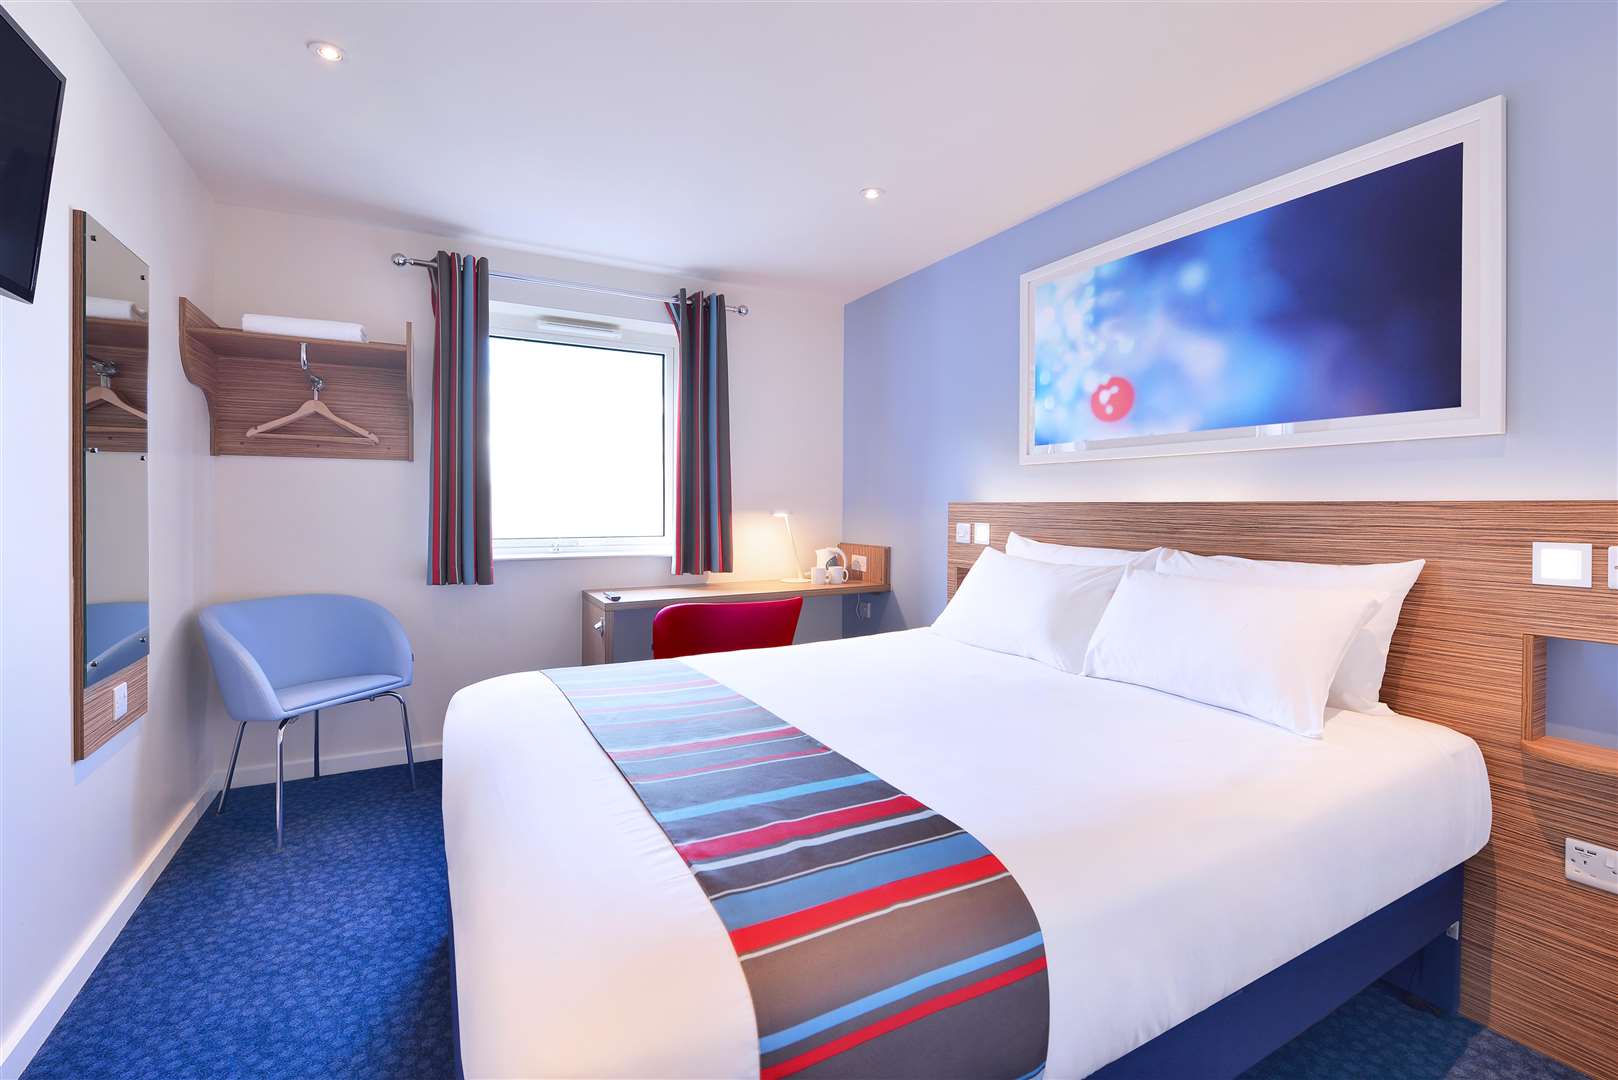 Travelodge wants to gain market share over rivals such as Premier Inn